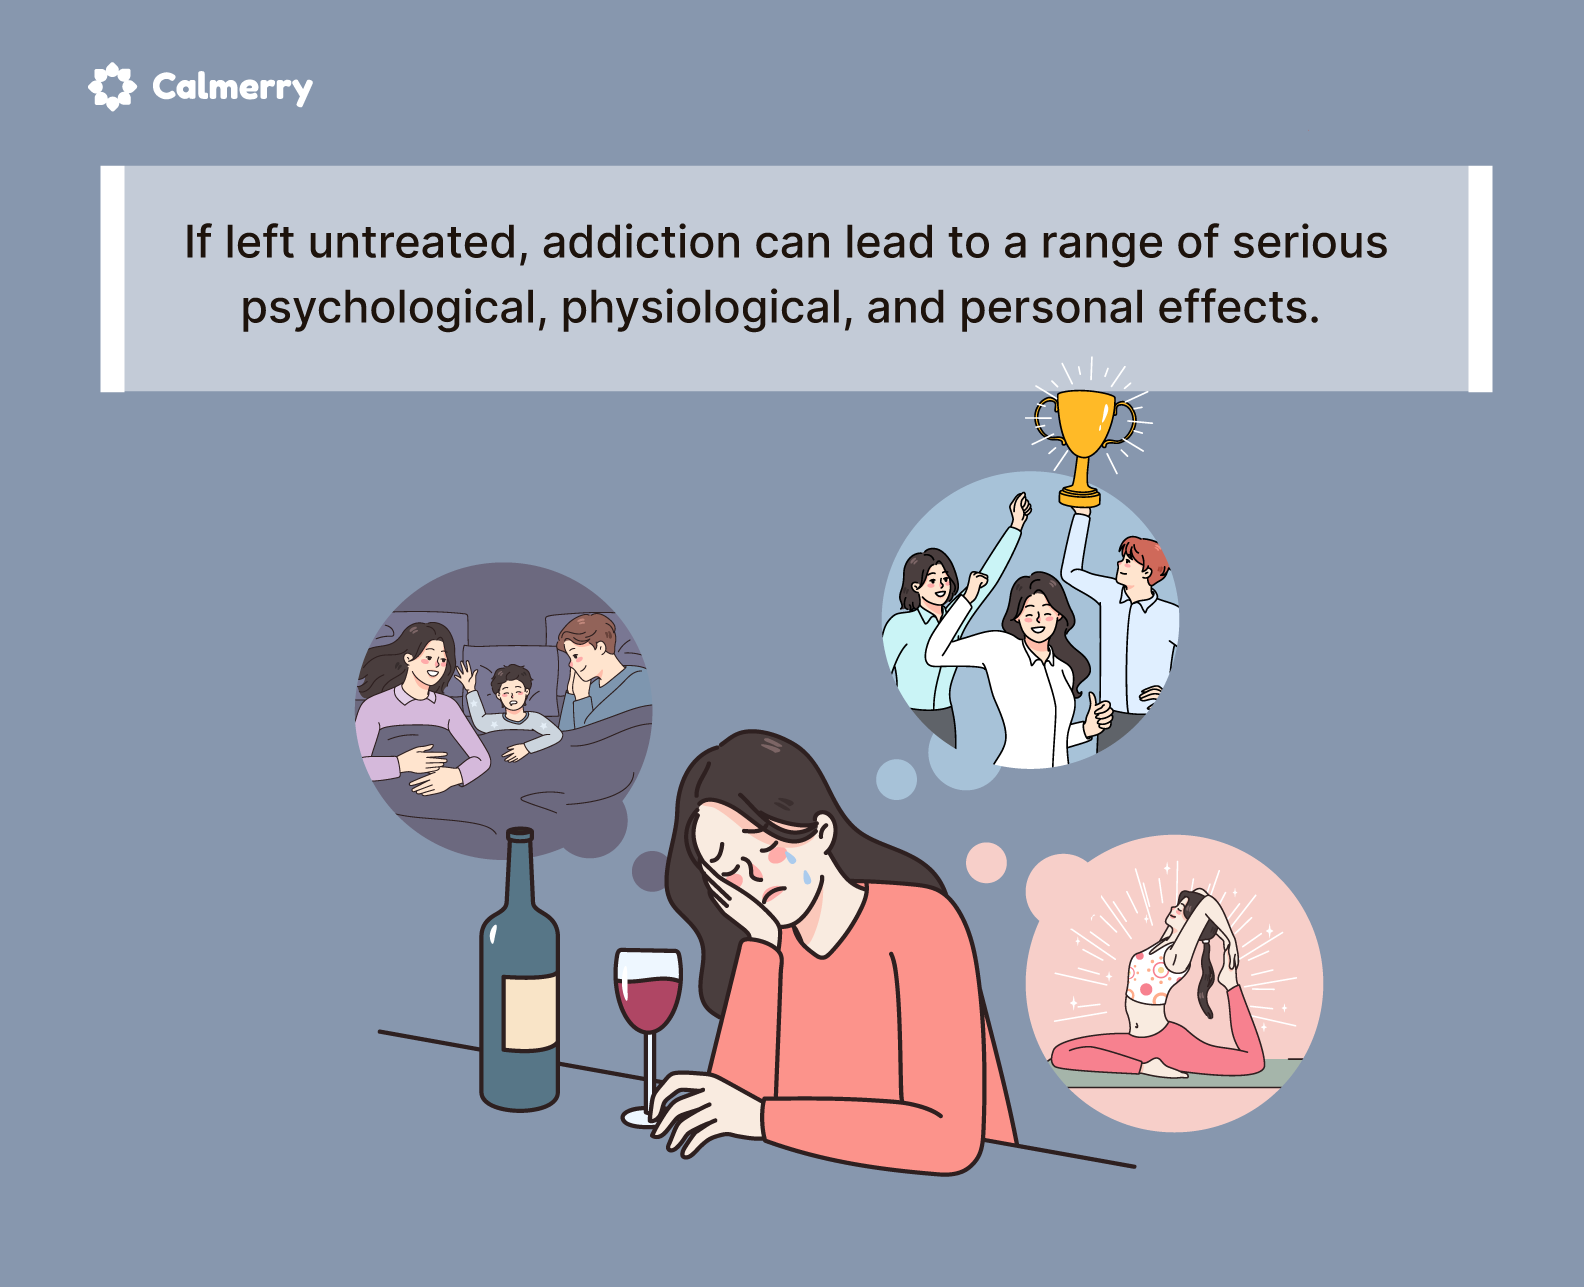 addiction can lead to a range of serious psychological, physiological, and personal effects